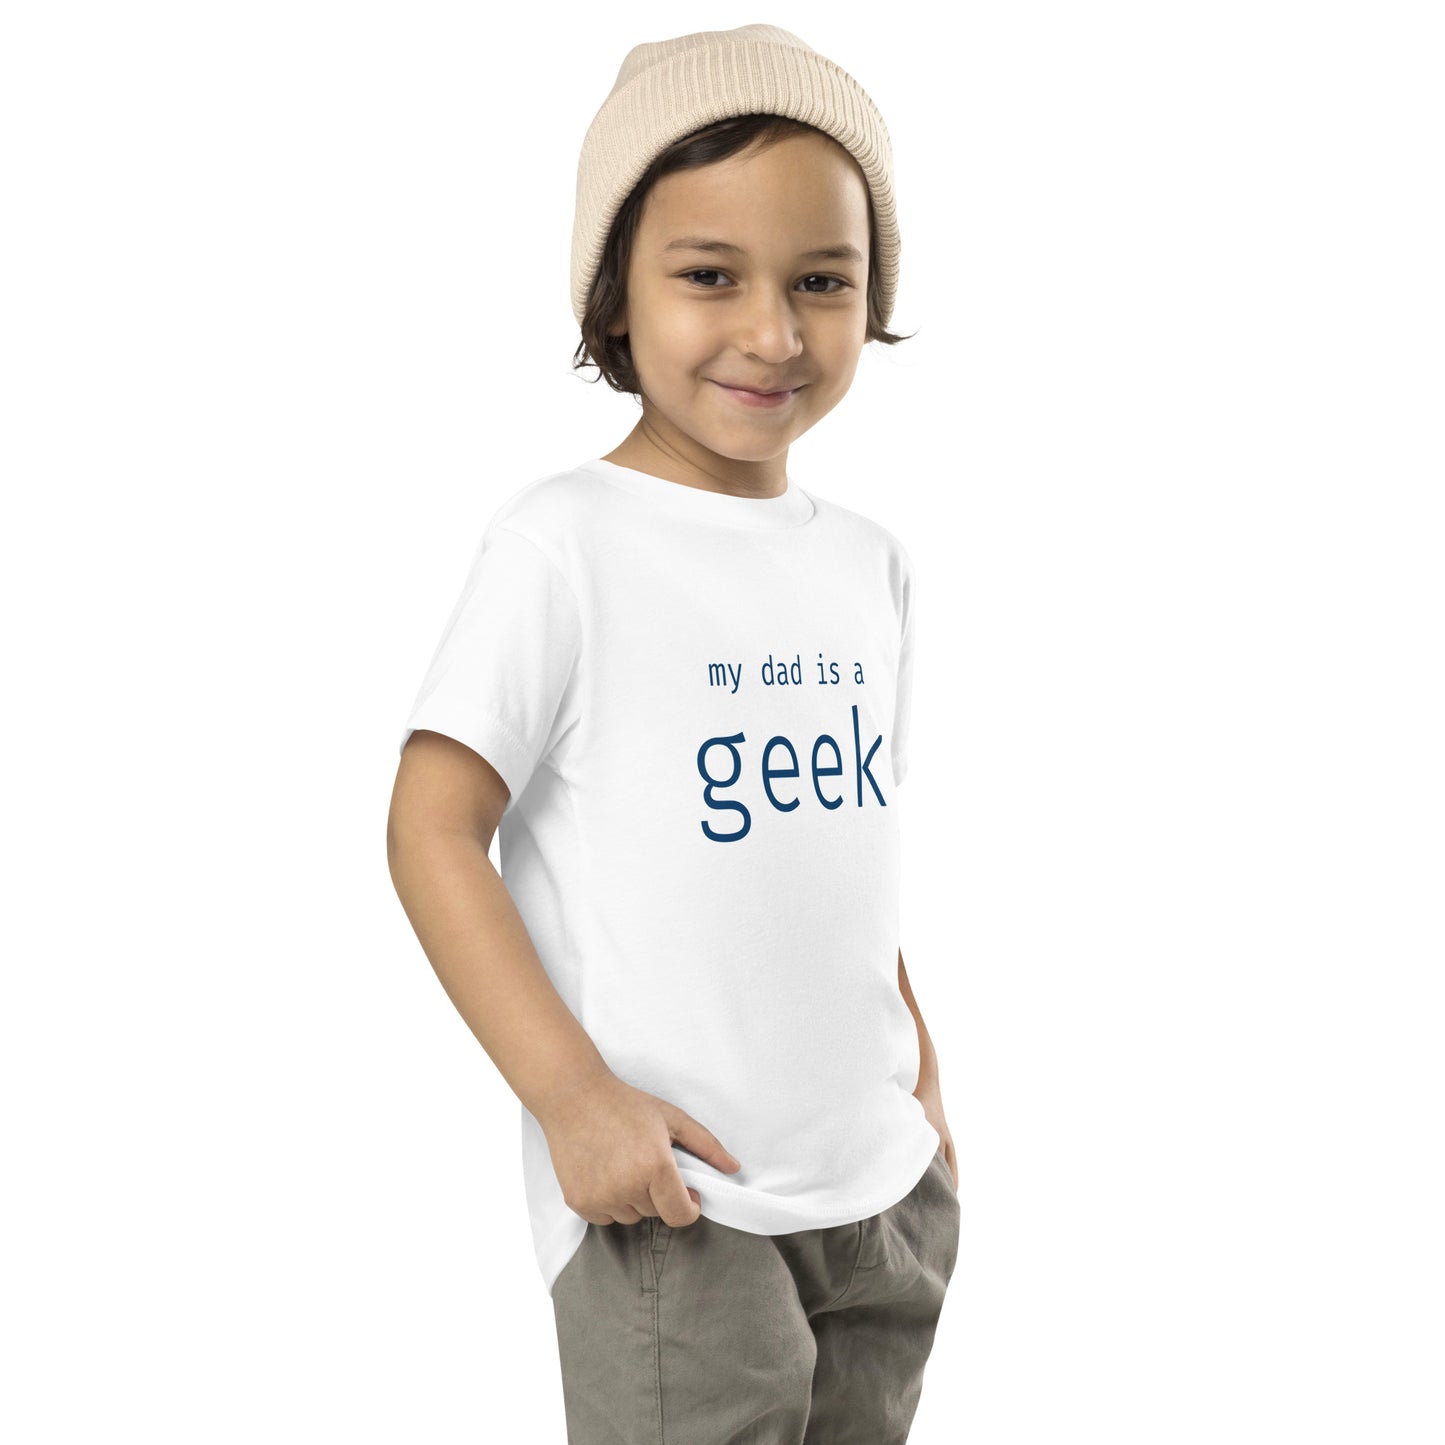 My dad is a geek - Blue Text - Toddler Short Sleeve Tee